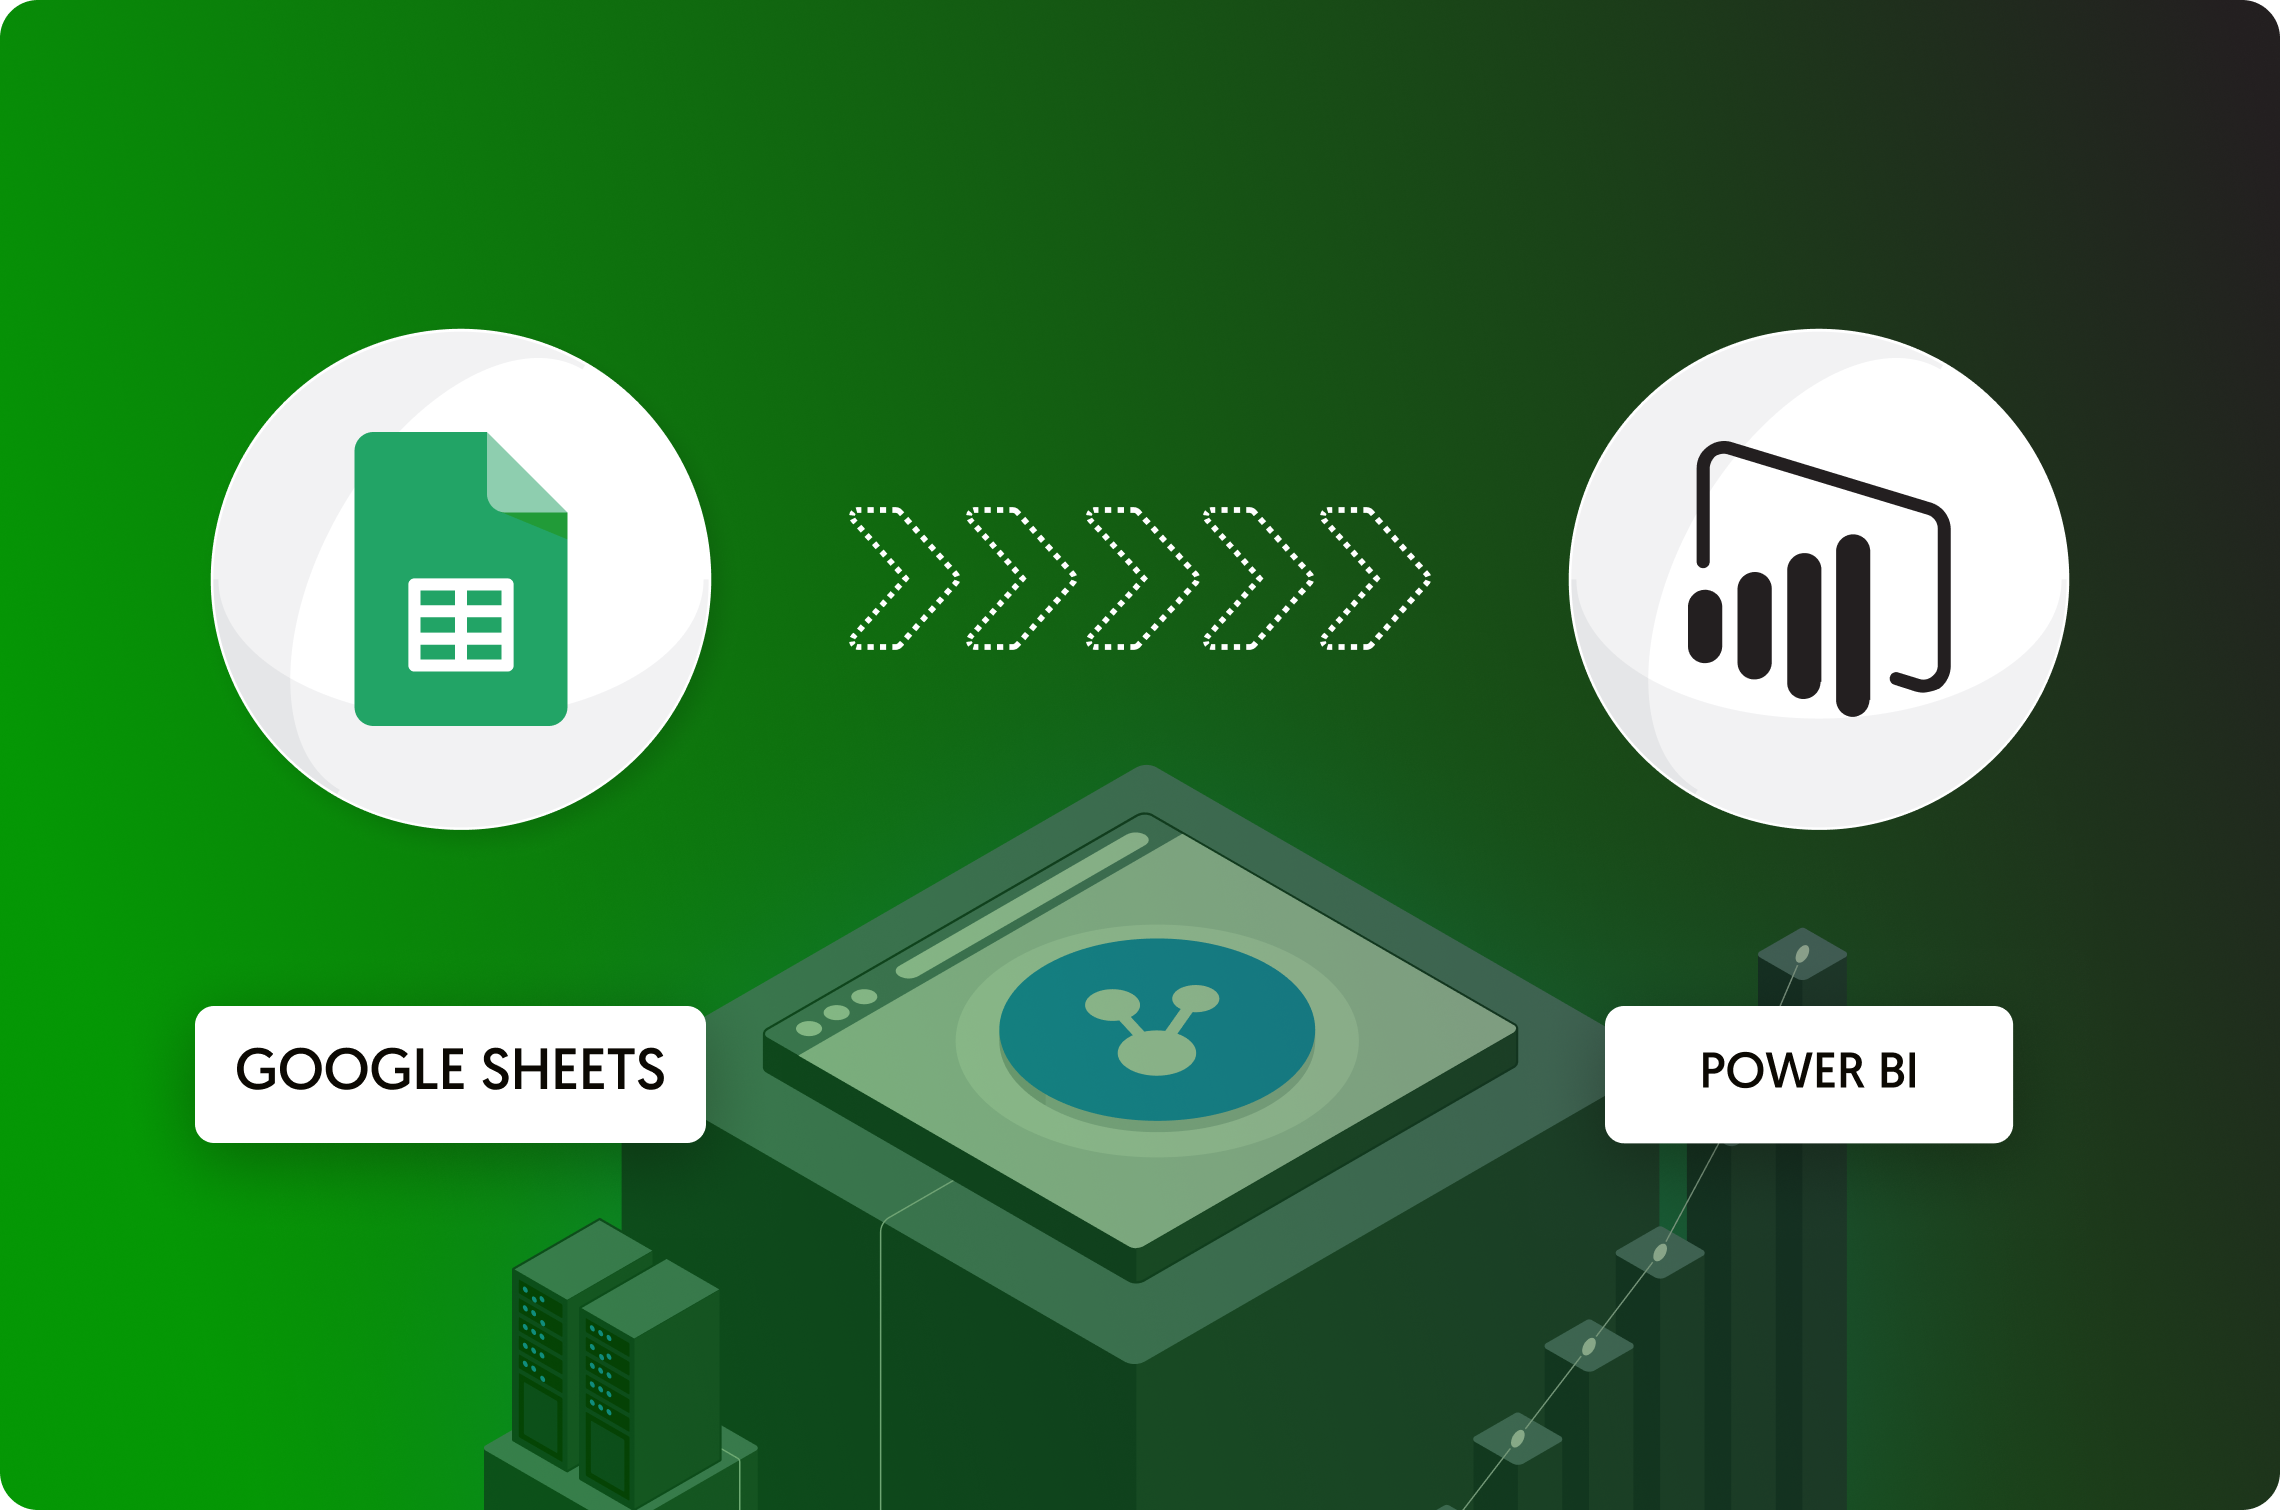 How to Connect Google Sheets with Power BI: Direct vs. Dataddo